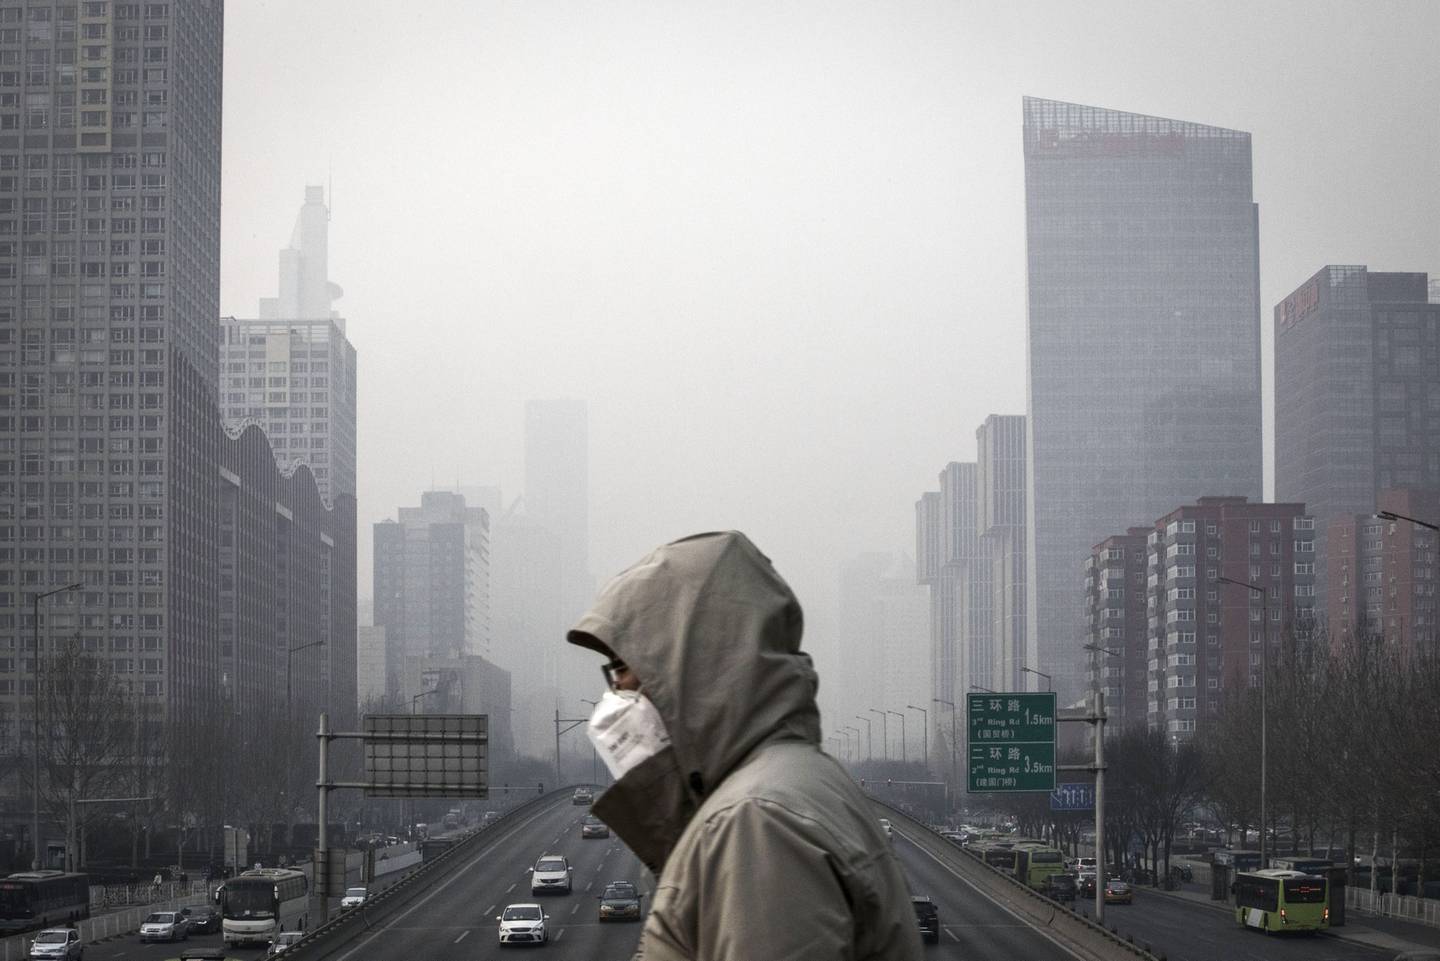 A man wearing a face mask walks on a footbridge as buildings shrouded in haze stands in the background in Beijing.